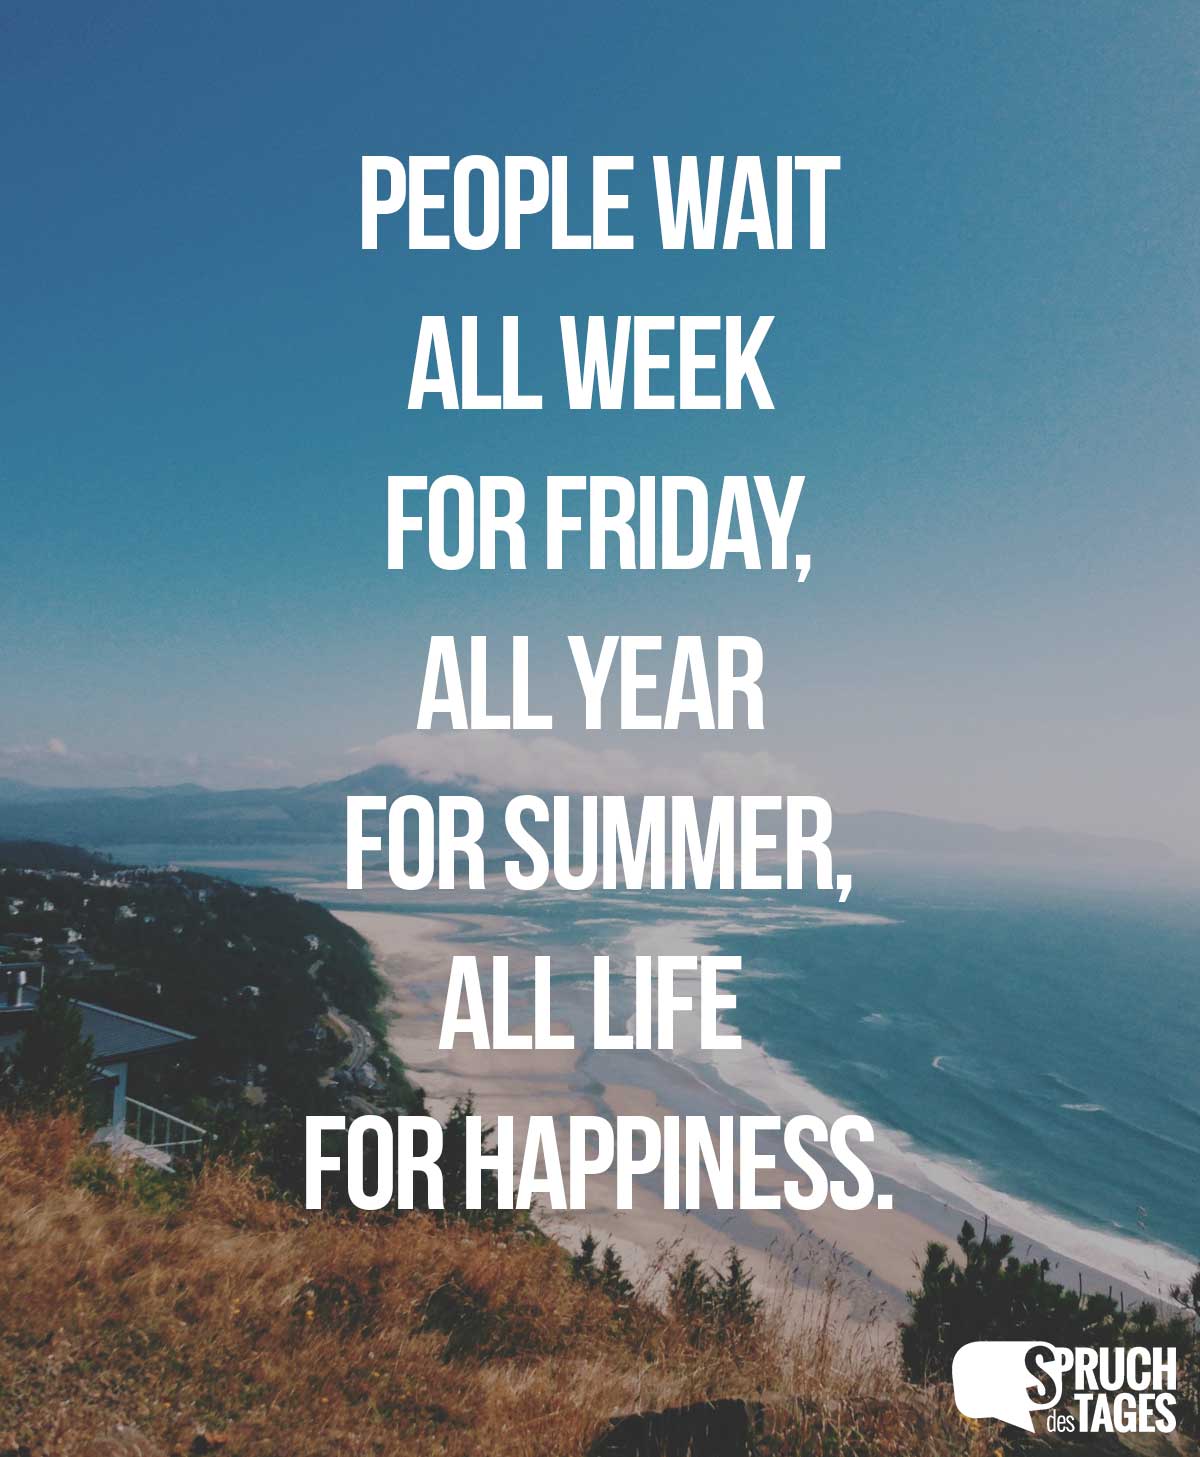 People wait all week for Friday. All year for summer. All life for happiness.